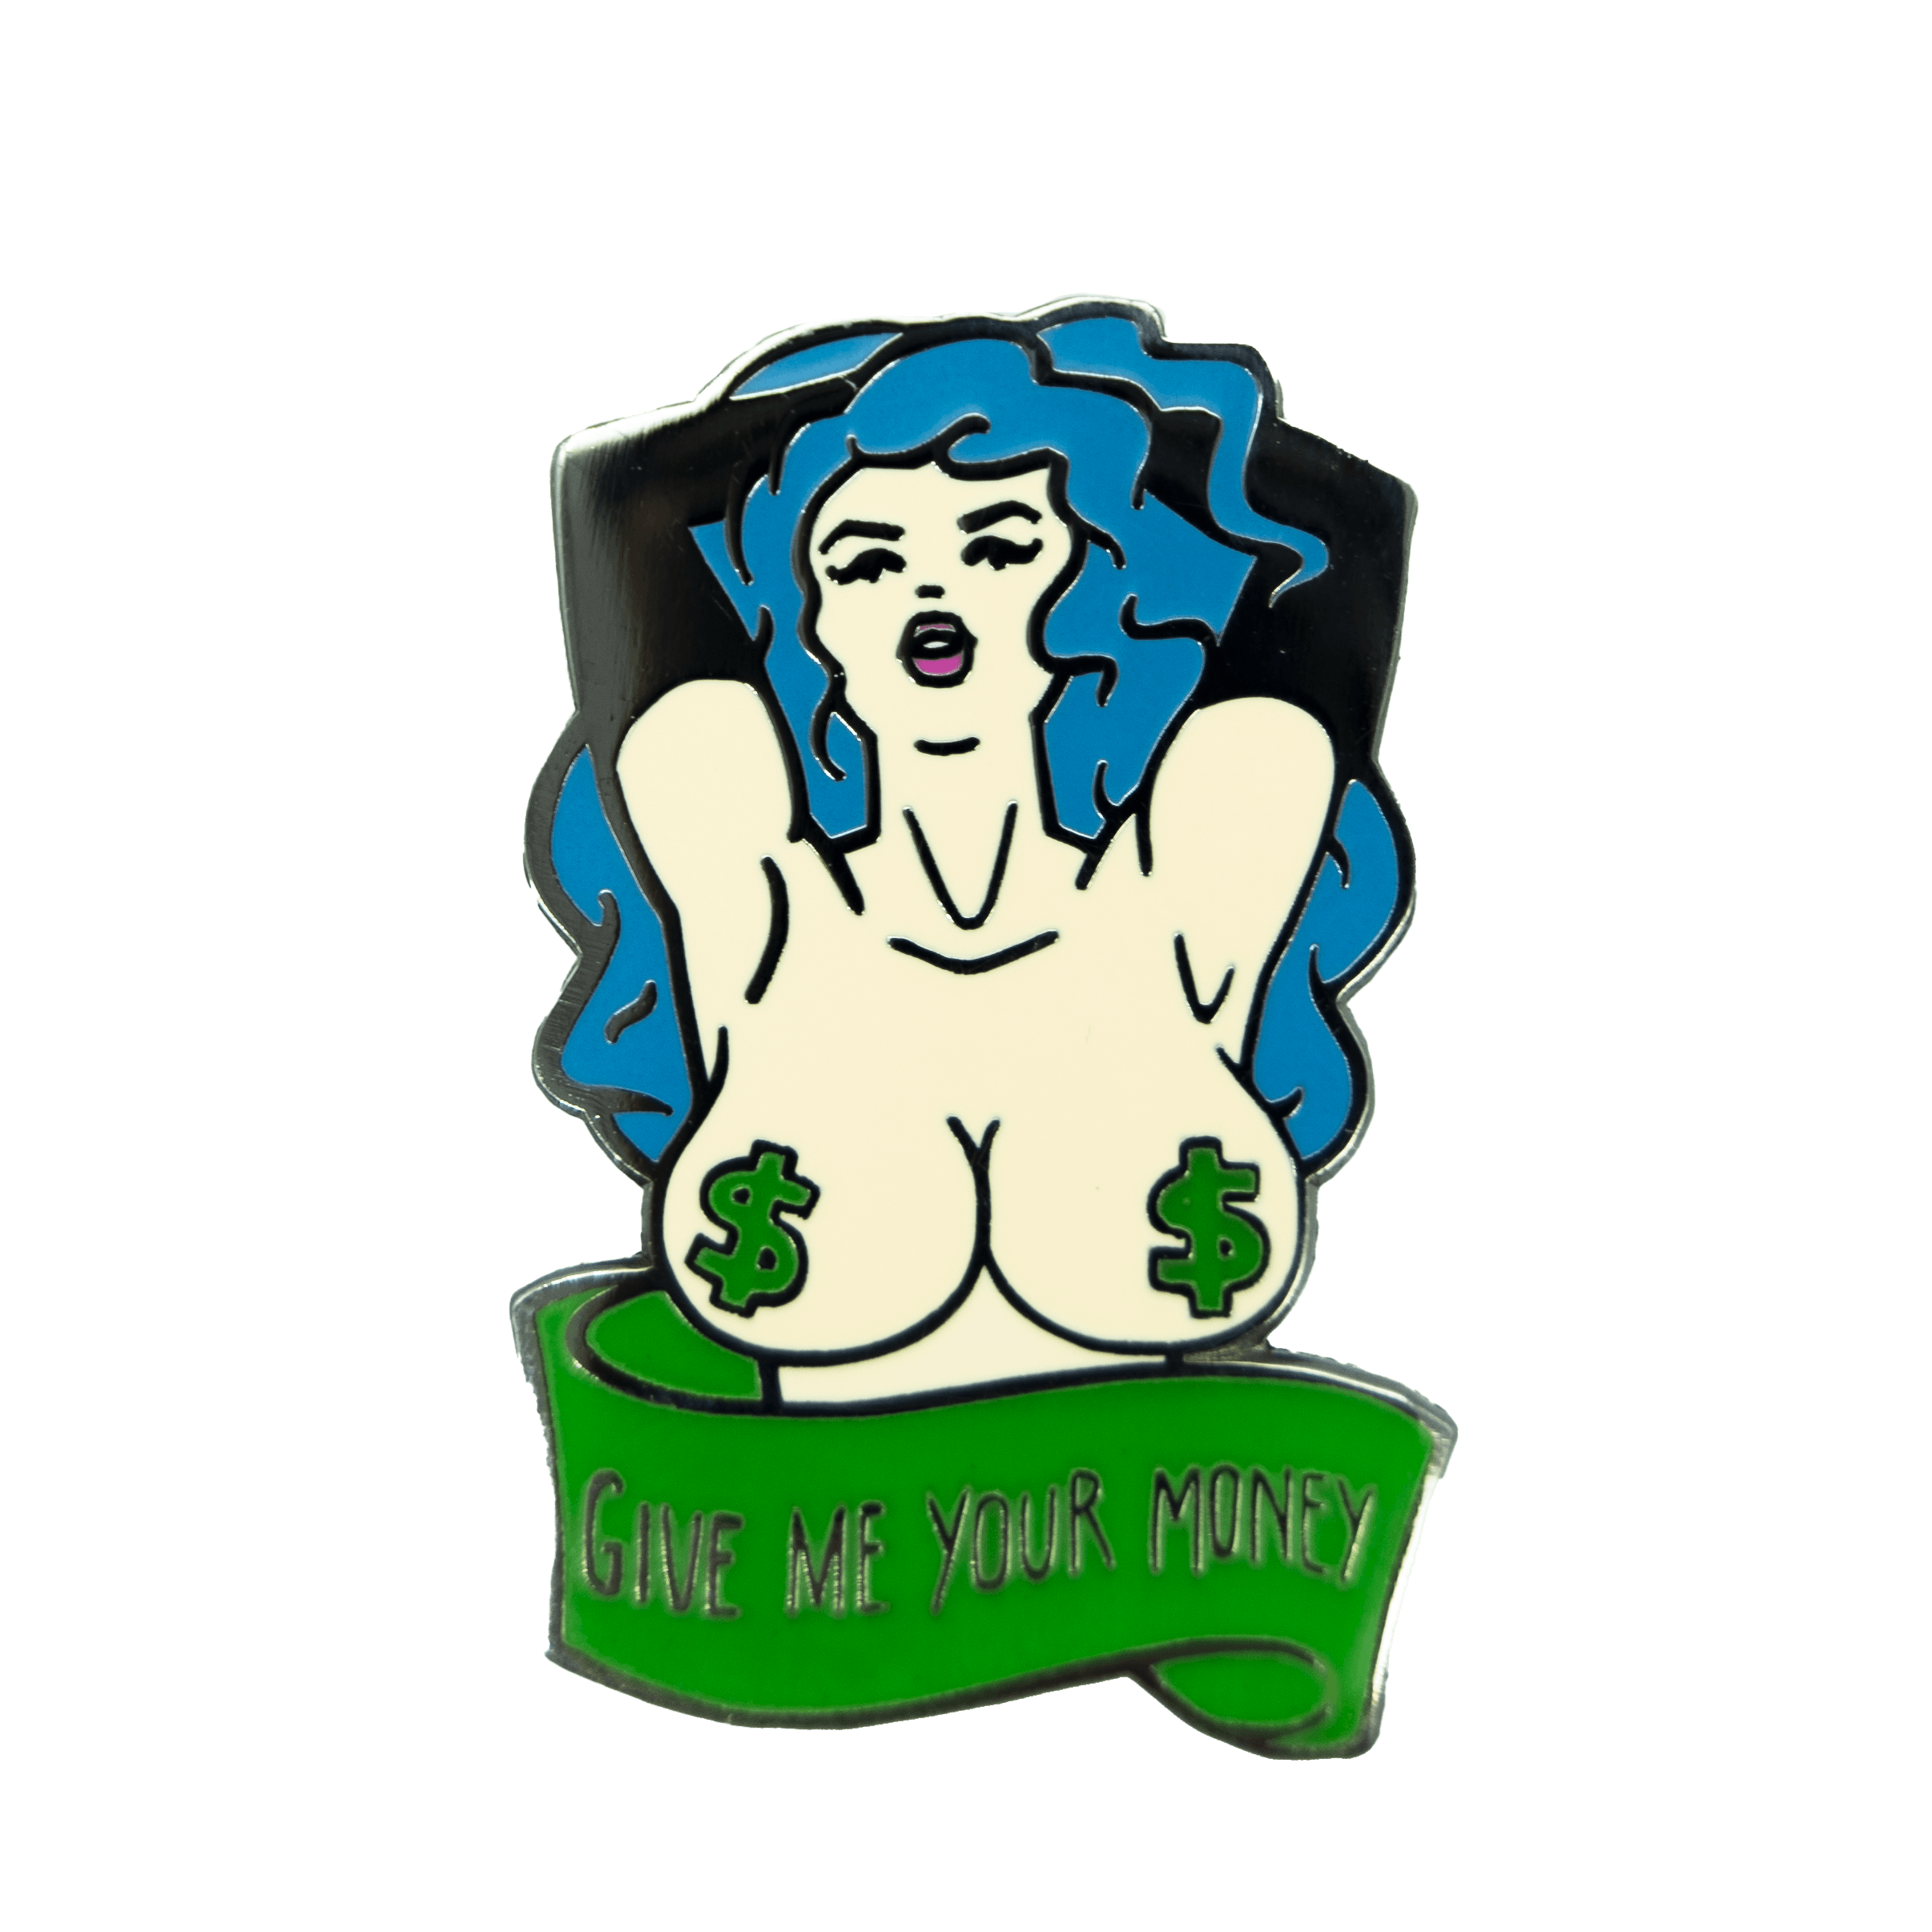 An enamel pin featuring the bust of a topless, blue haired woman wearing green dollar sign pasties. Below her is a banner that says "GIVE ME YOUR MONEY".